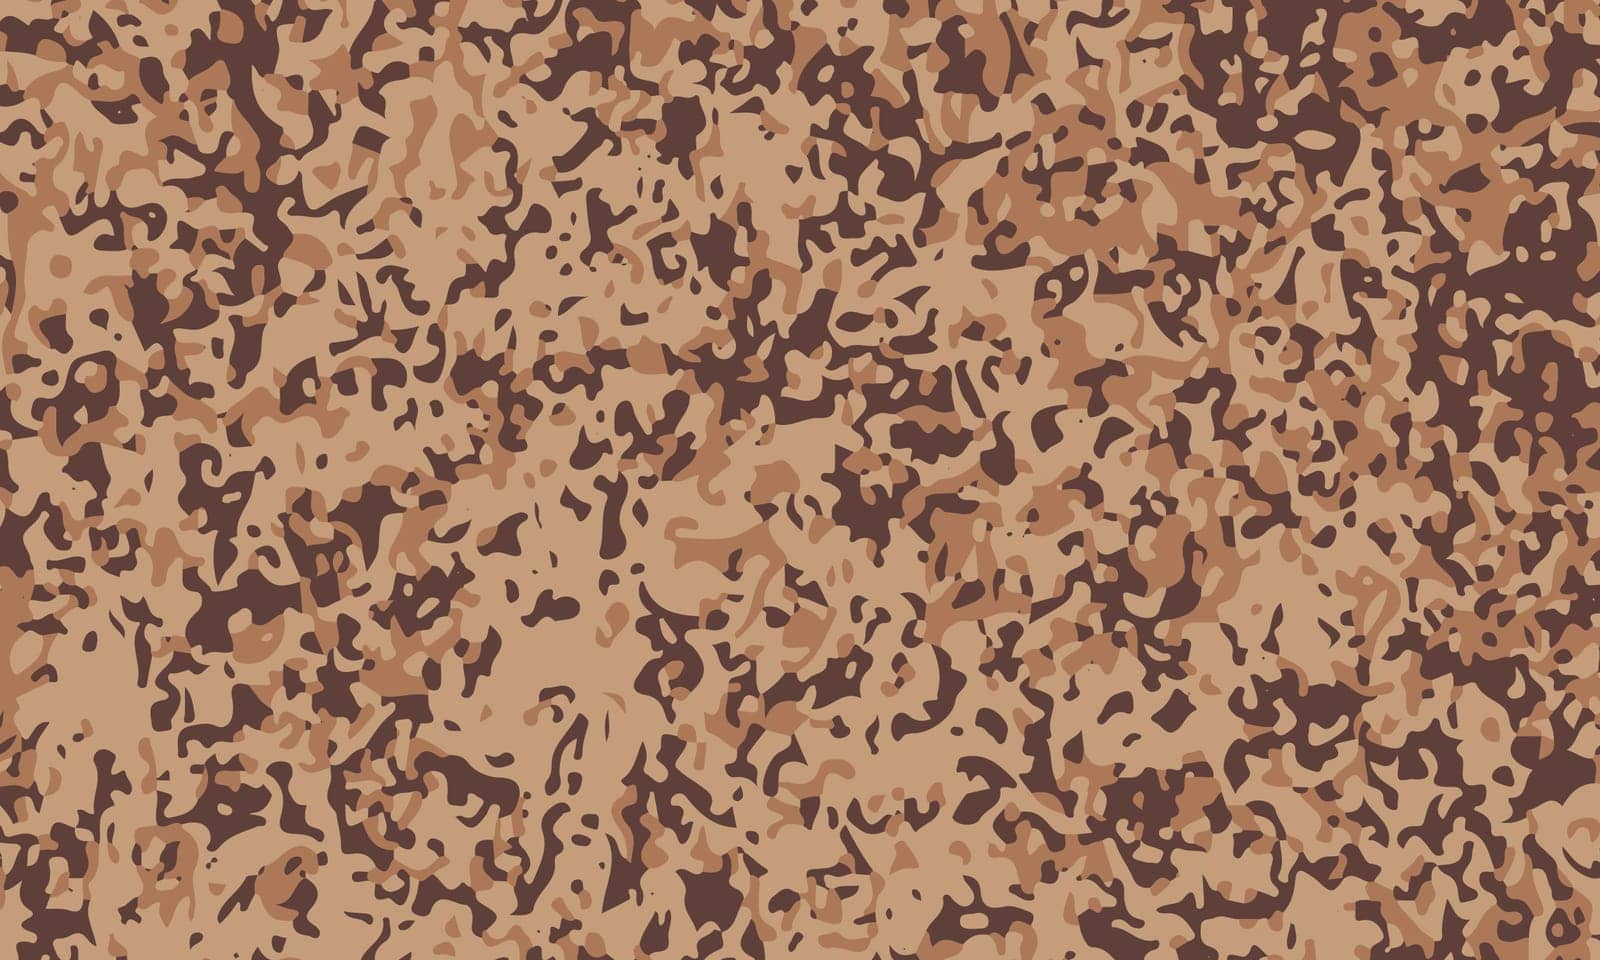 Texture military camouflage army. Camouflage military background. Vector illustration